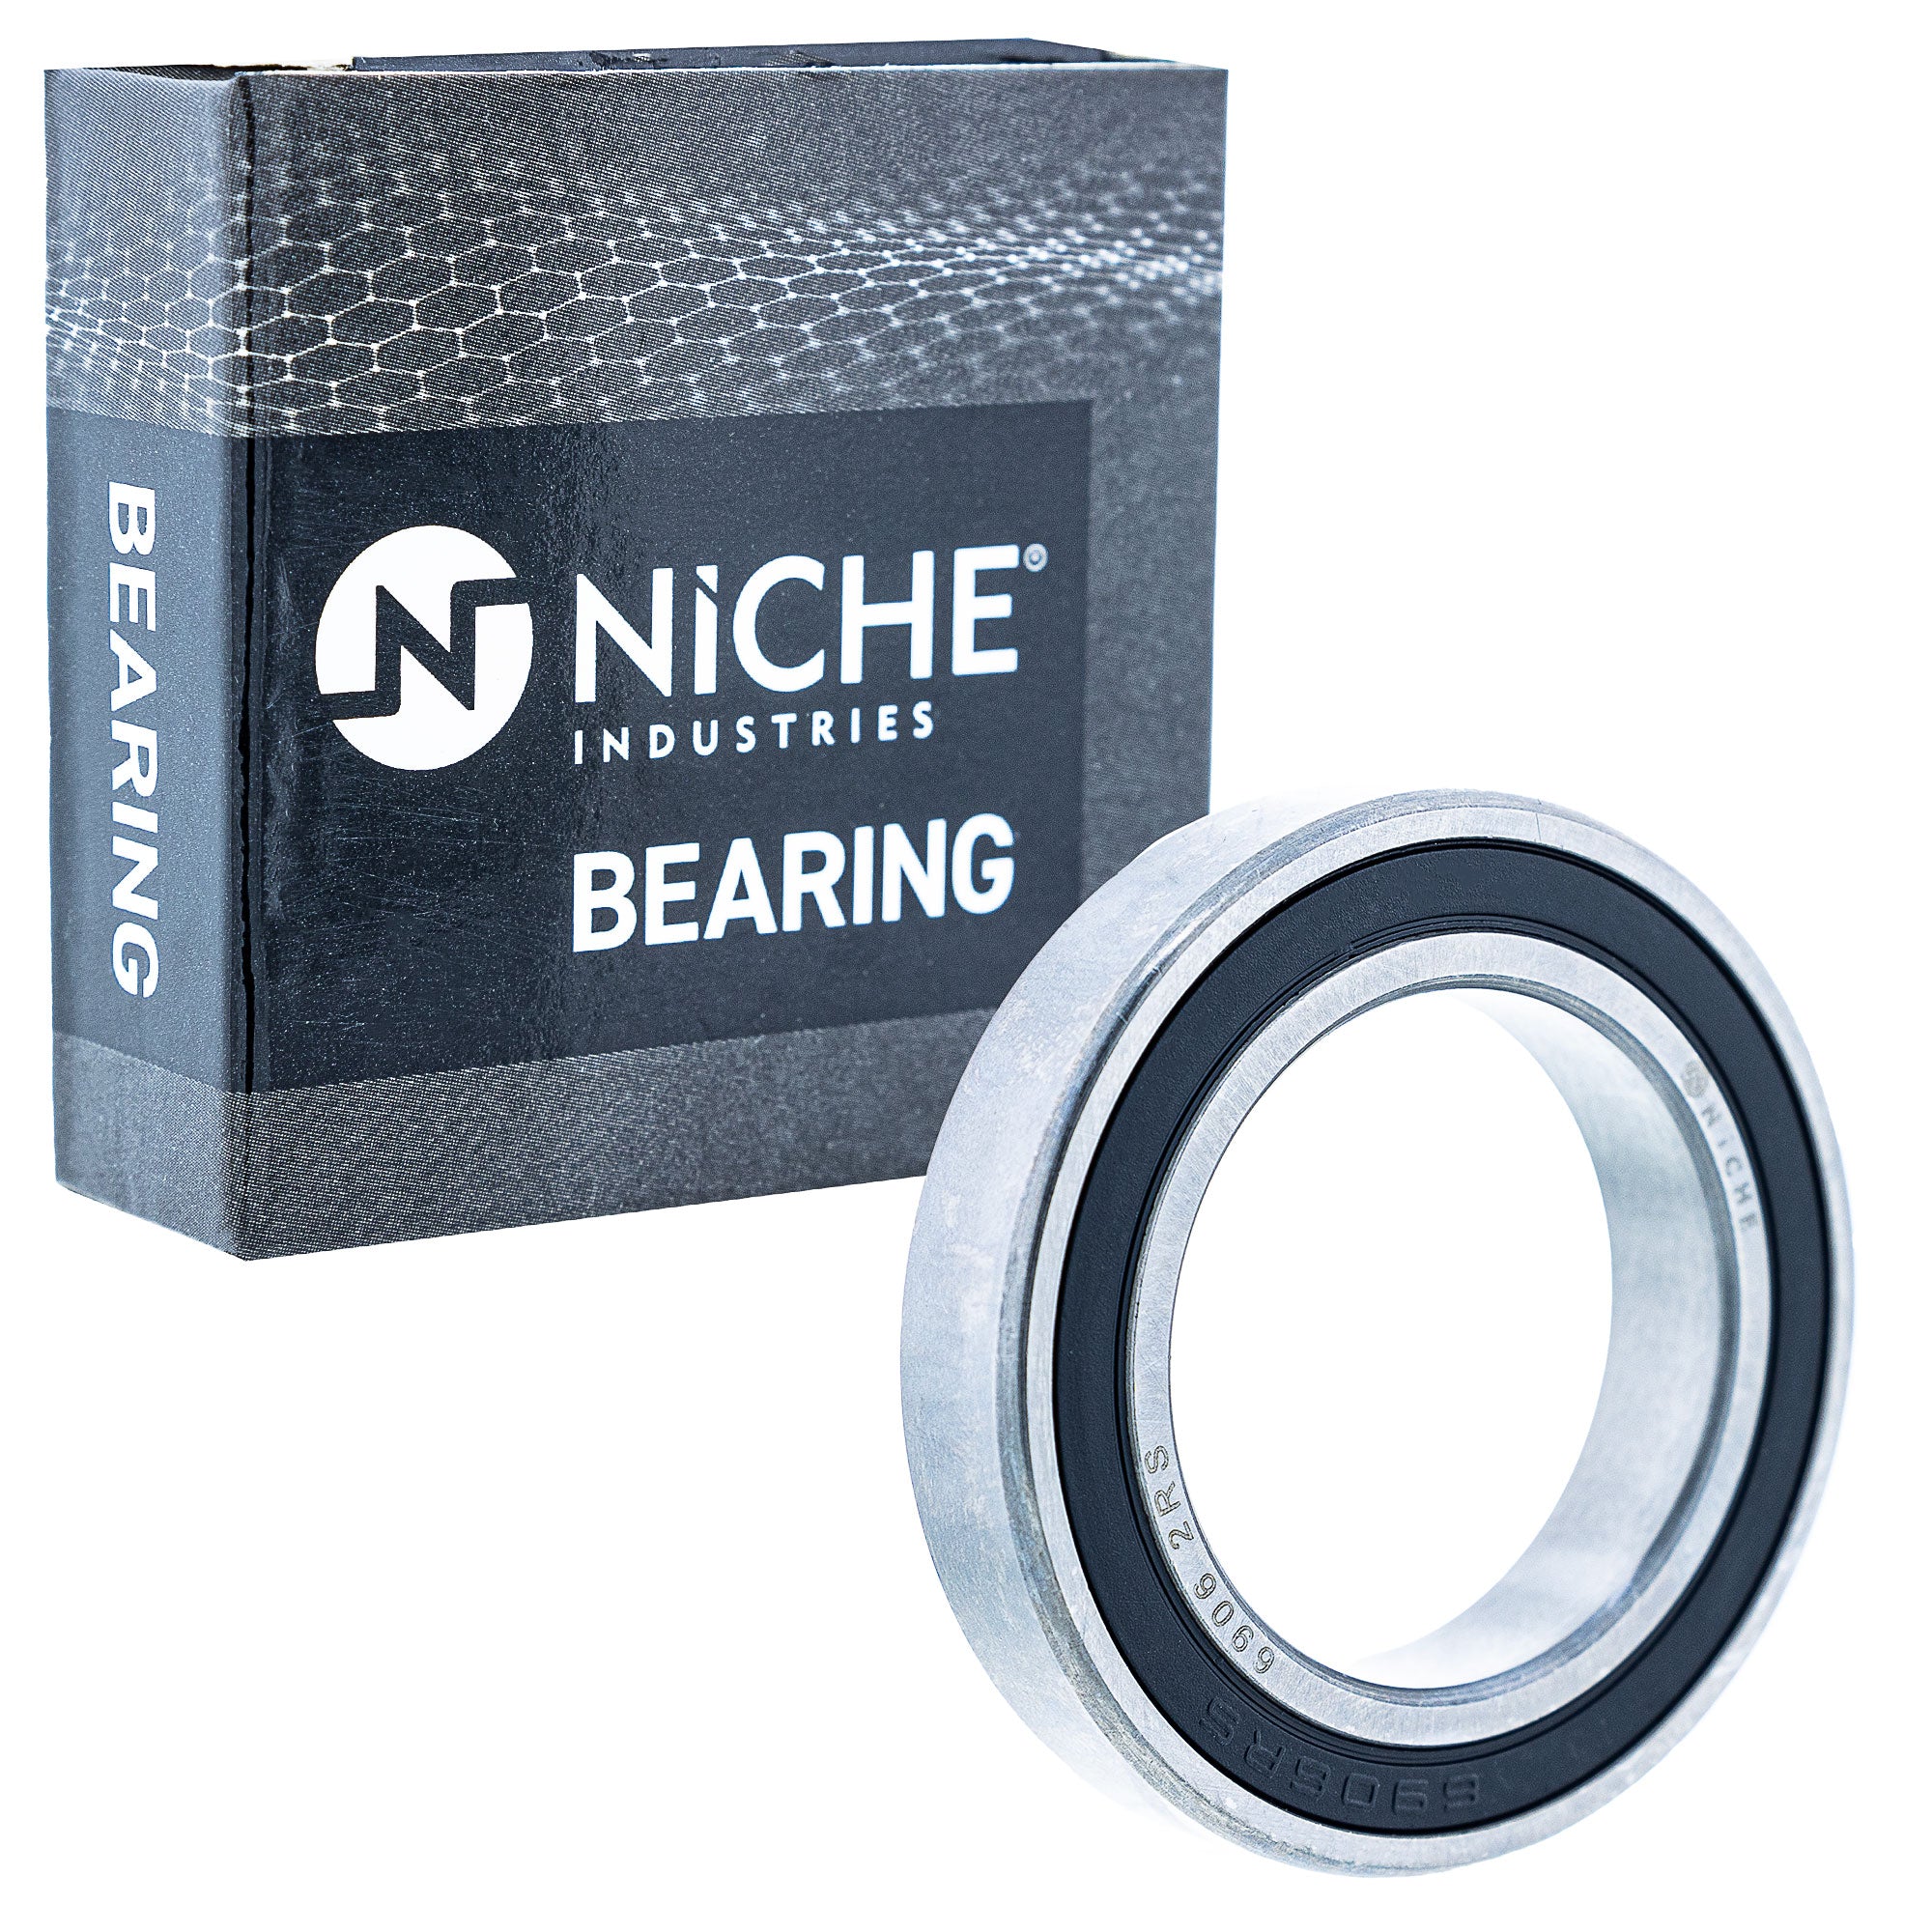 NICHE 519-CBB2250R Bearing 2-Pack for zOTHER 990 950 85 690